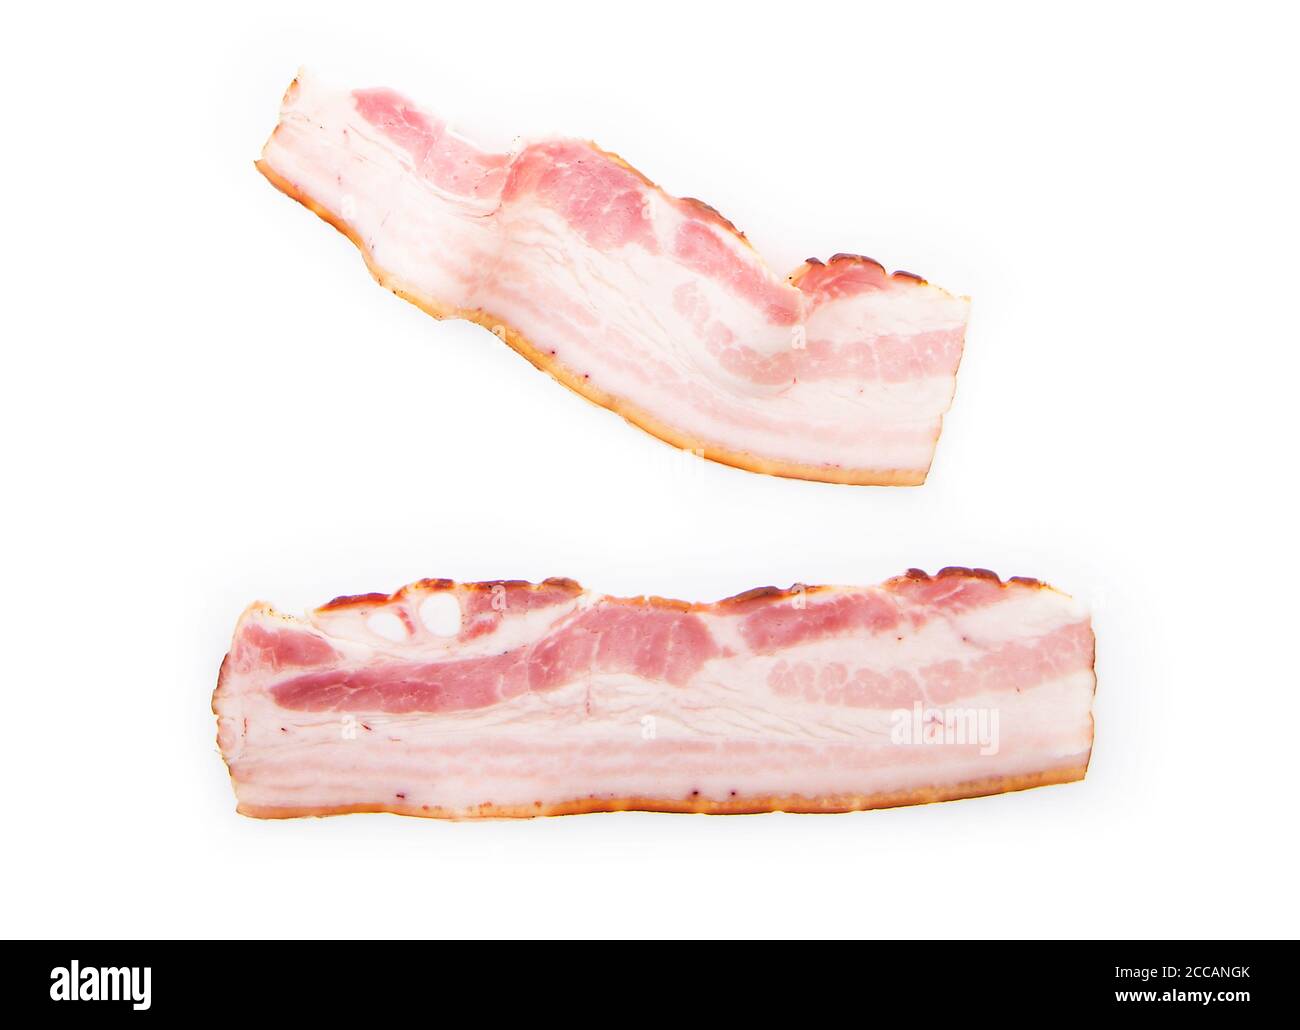 Slices of raw bacon isolated on white background Stock Photo